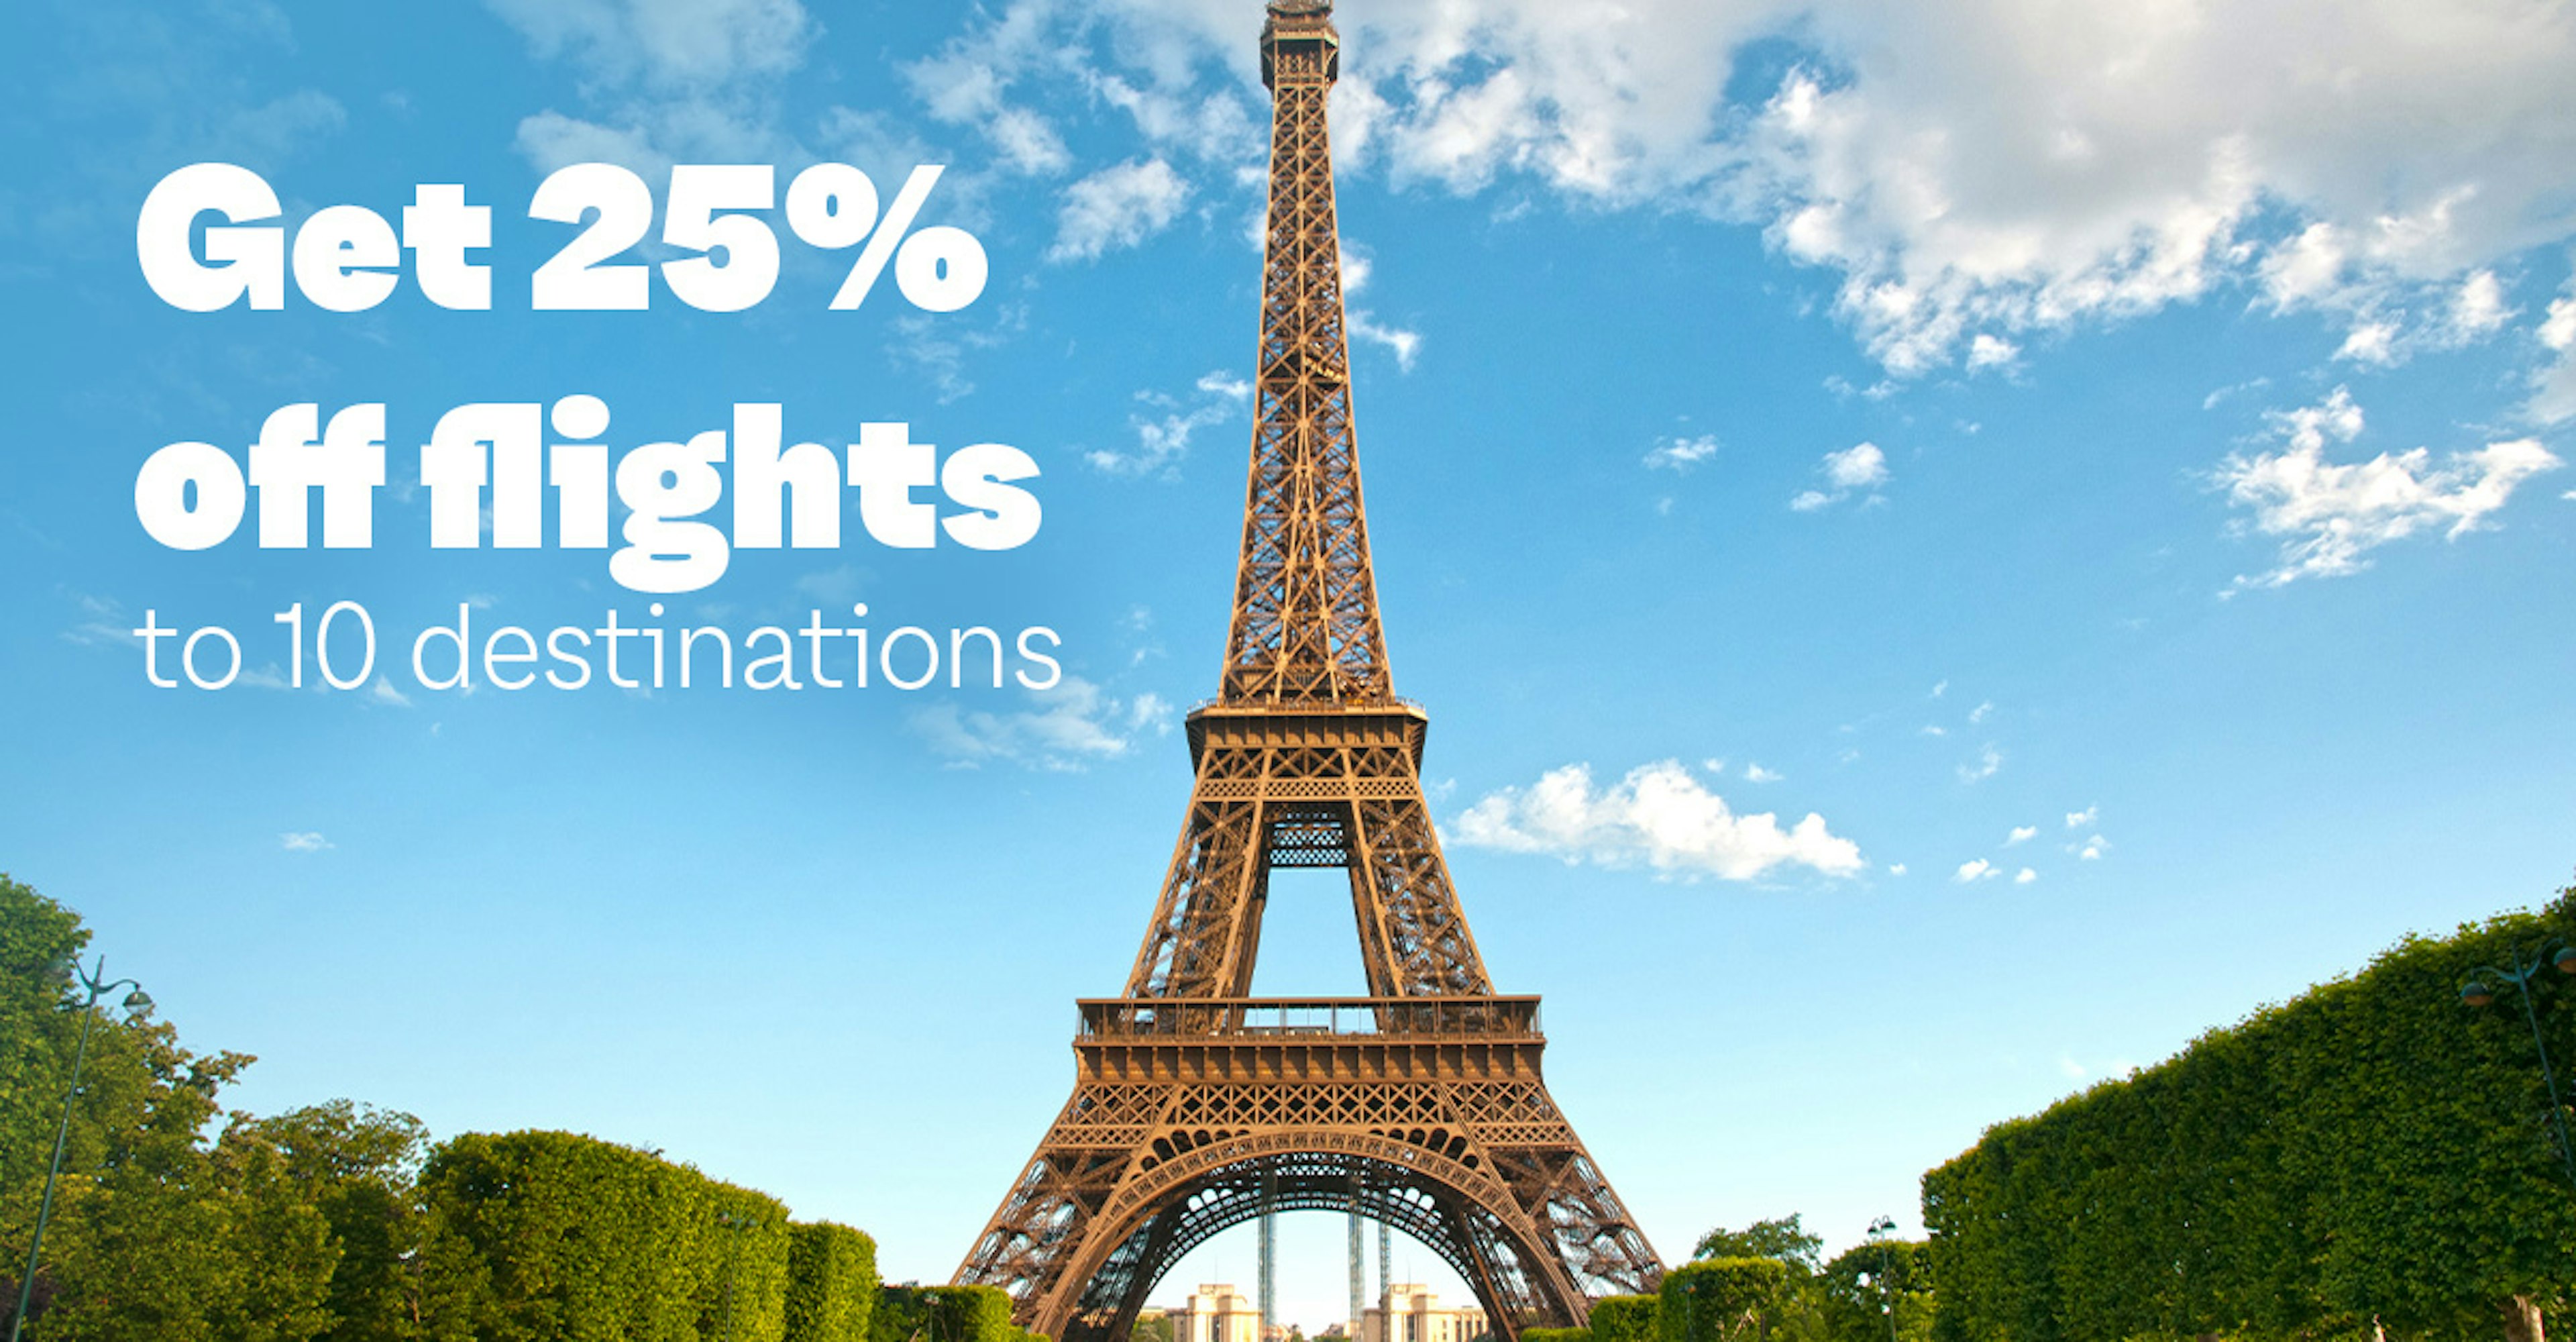 The Eiffel Tower with the text "Get 25% of flights to 10 destinations"